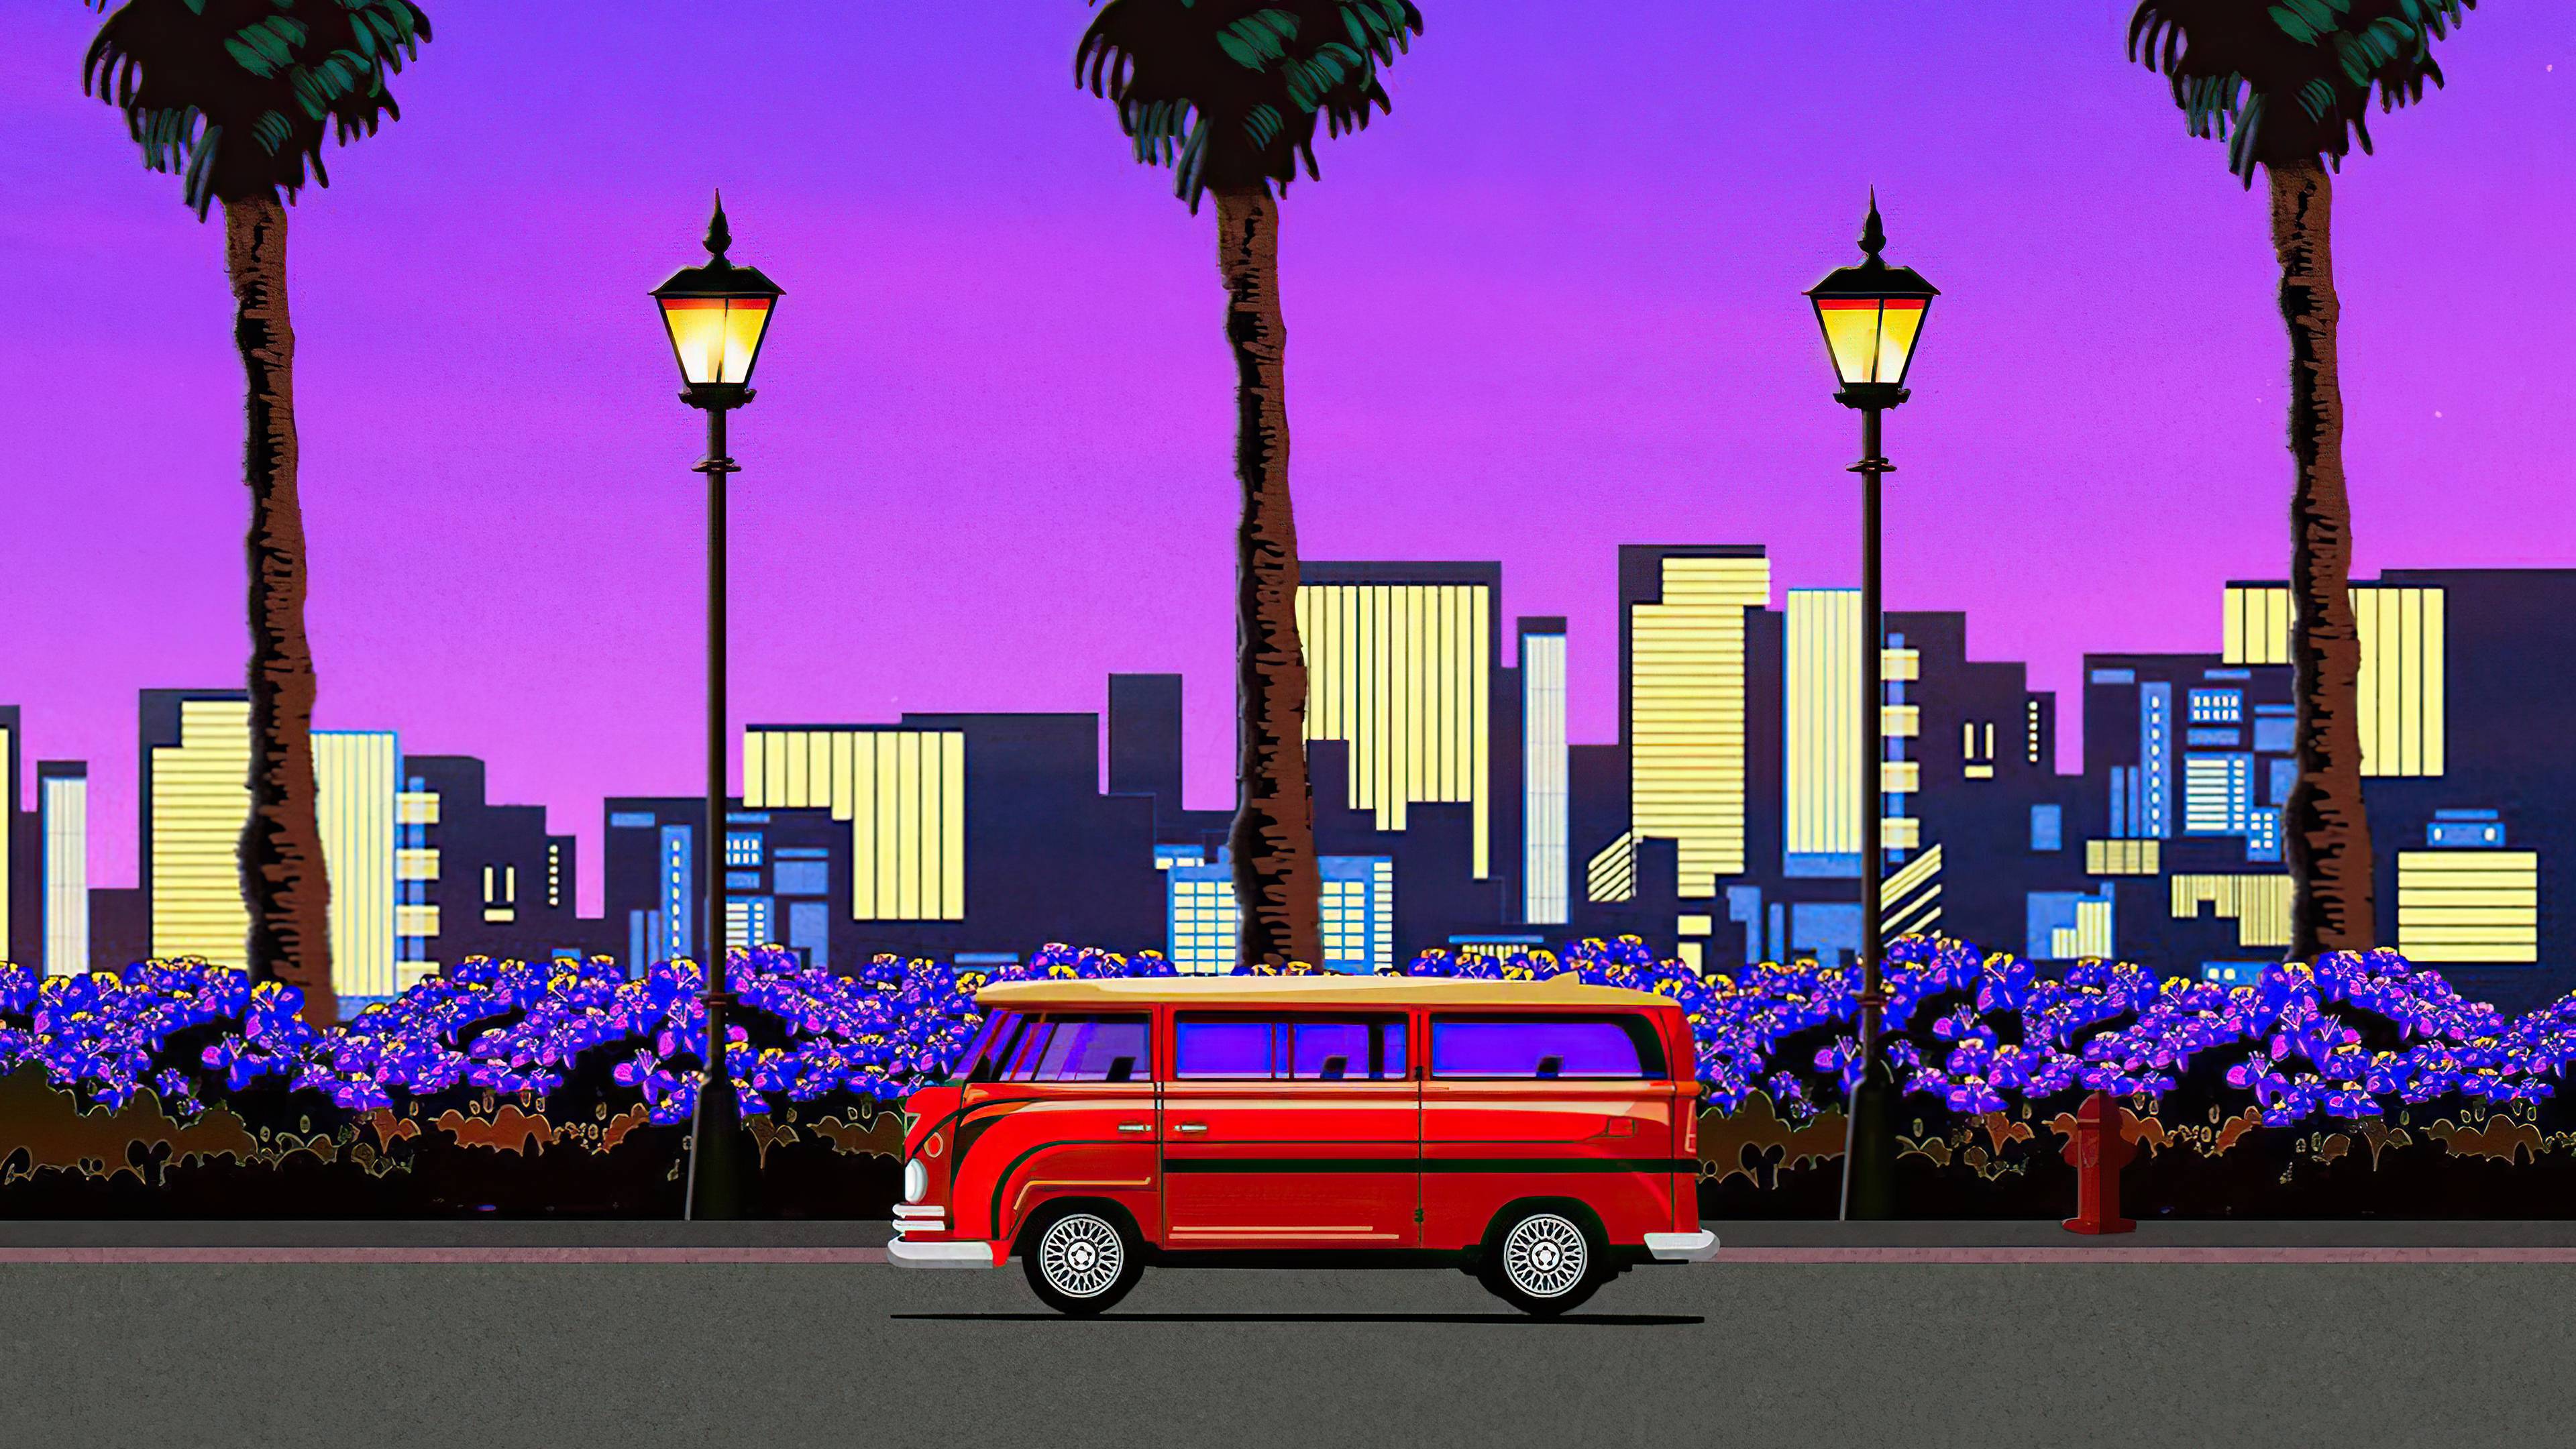 A van is parked in front of some trees - Chromebook, vaporwave, Las Vegas, 3840x2160, sky, HD